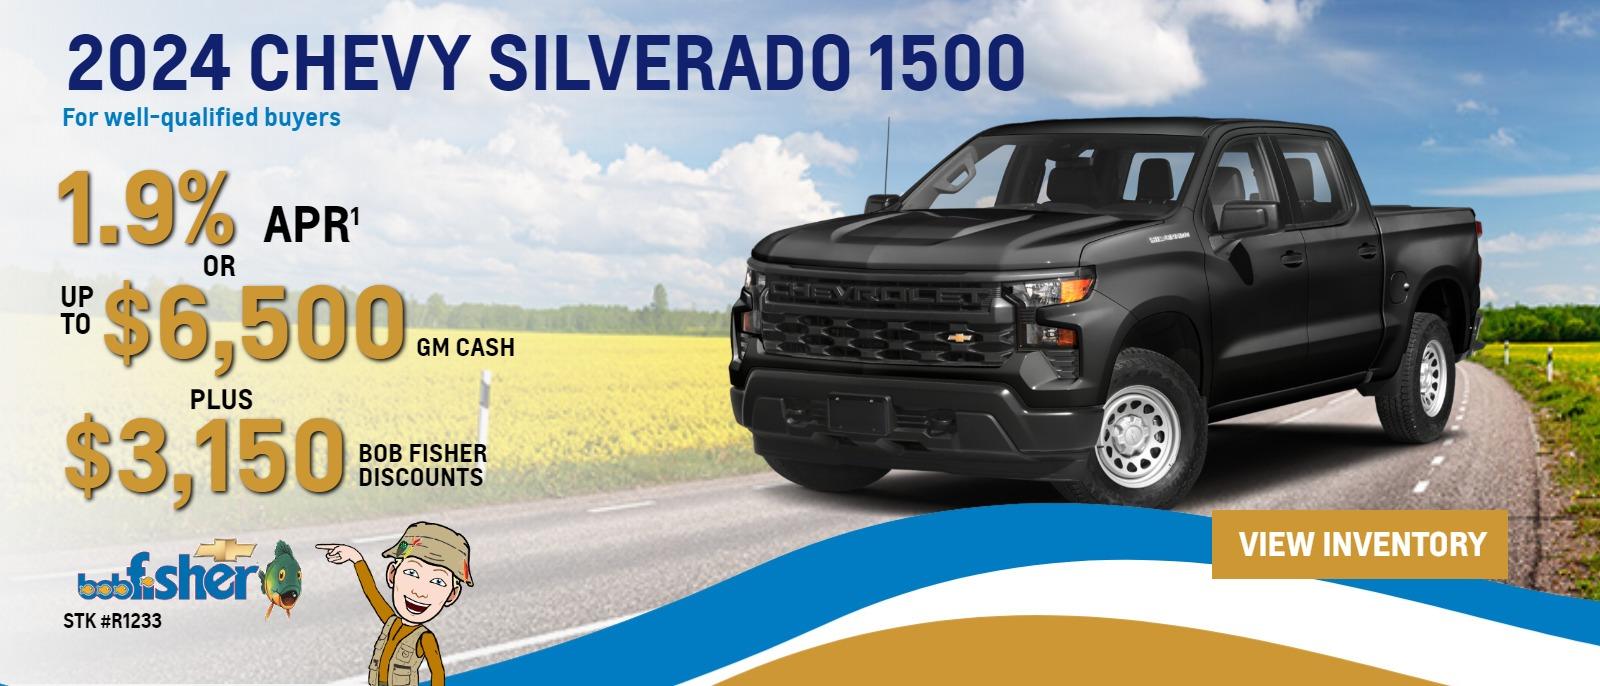 2024 CHEVY SILVERADO 1500 CREW CAB LT
For Well-Qualified Buyers
0.9% APR
or
$6,500 GM Cash
PLUS
$3,150 Bob Fisher Discounts